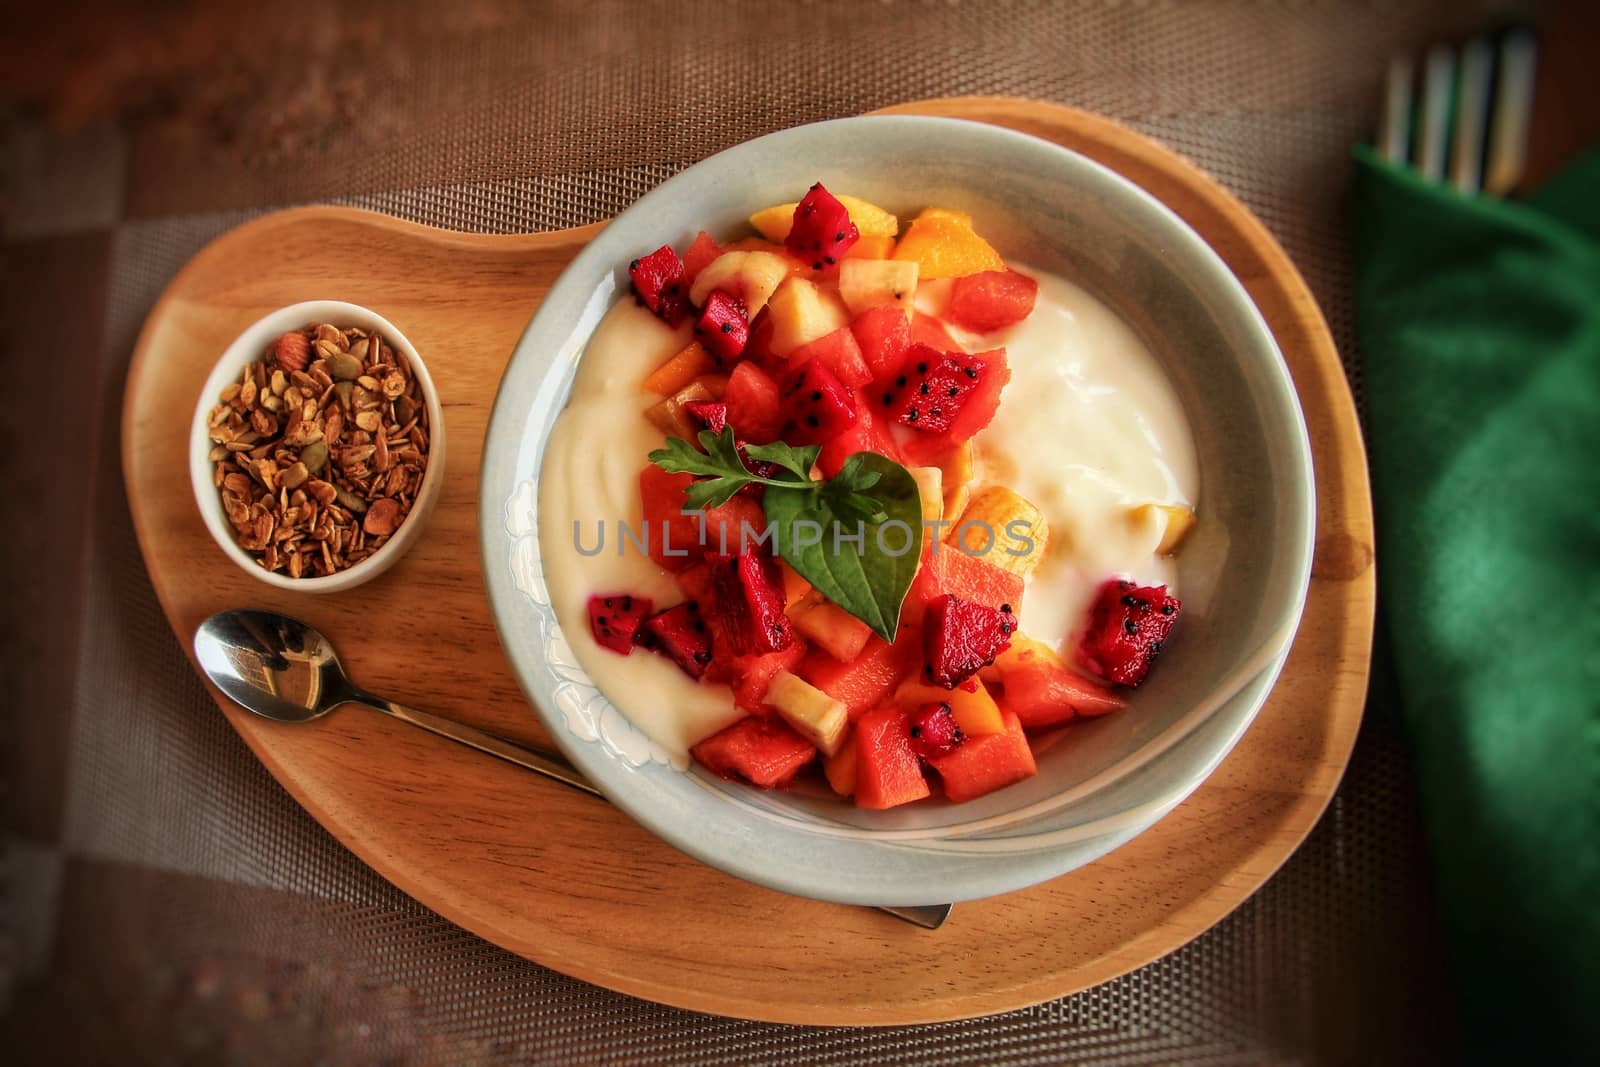 Full vegan breakfast of tropical fruit smoothie bowl with muesli as a way to stay healthy and cope during home quarantine due to the covid-19 pandemic